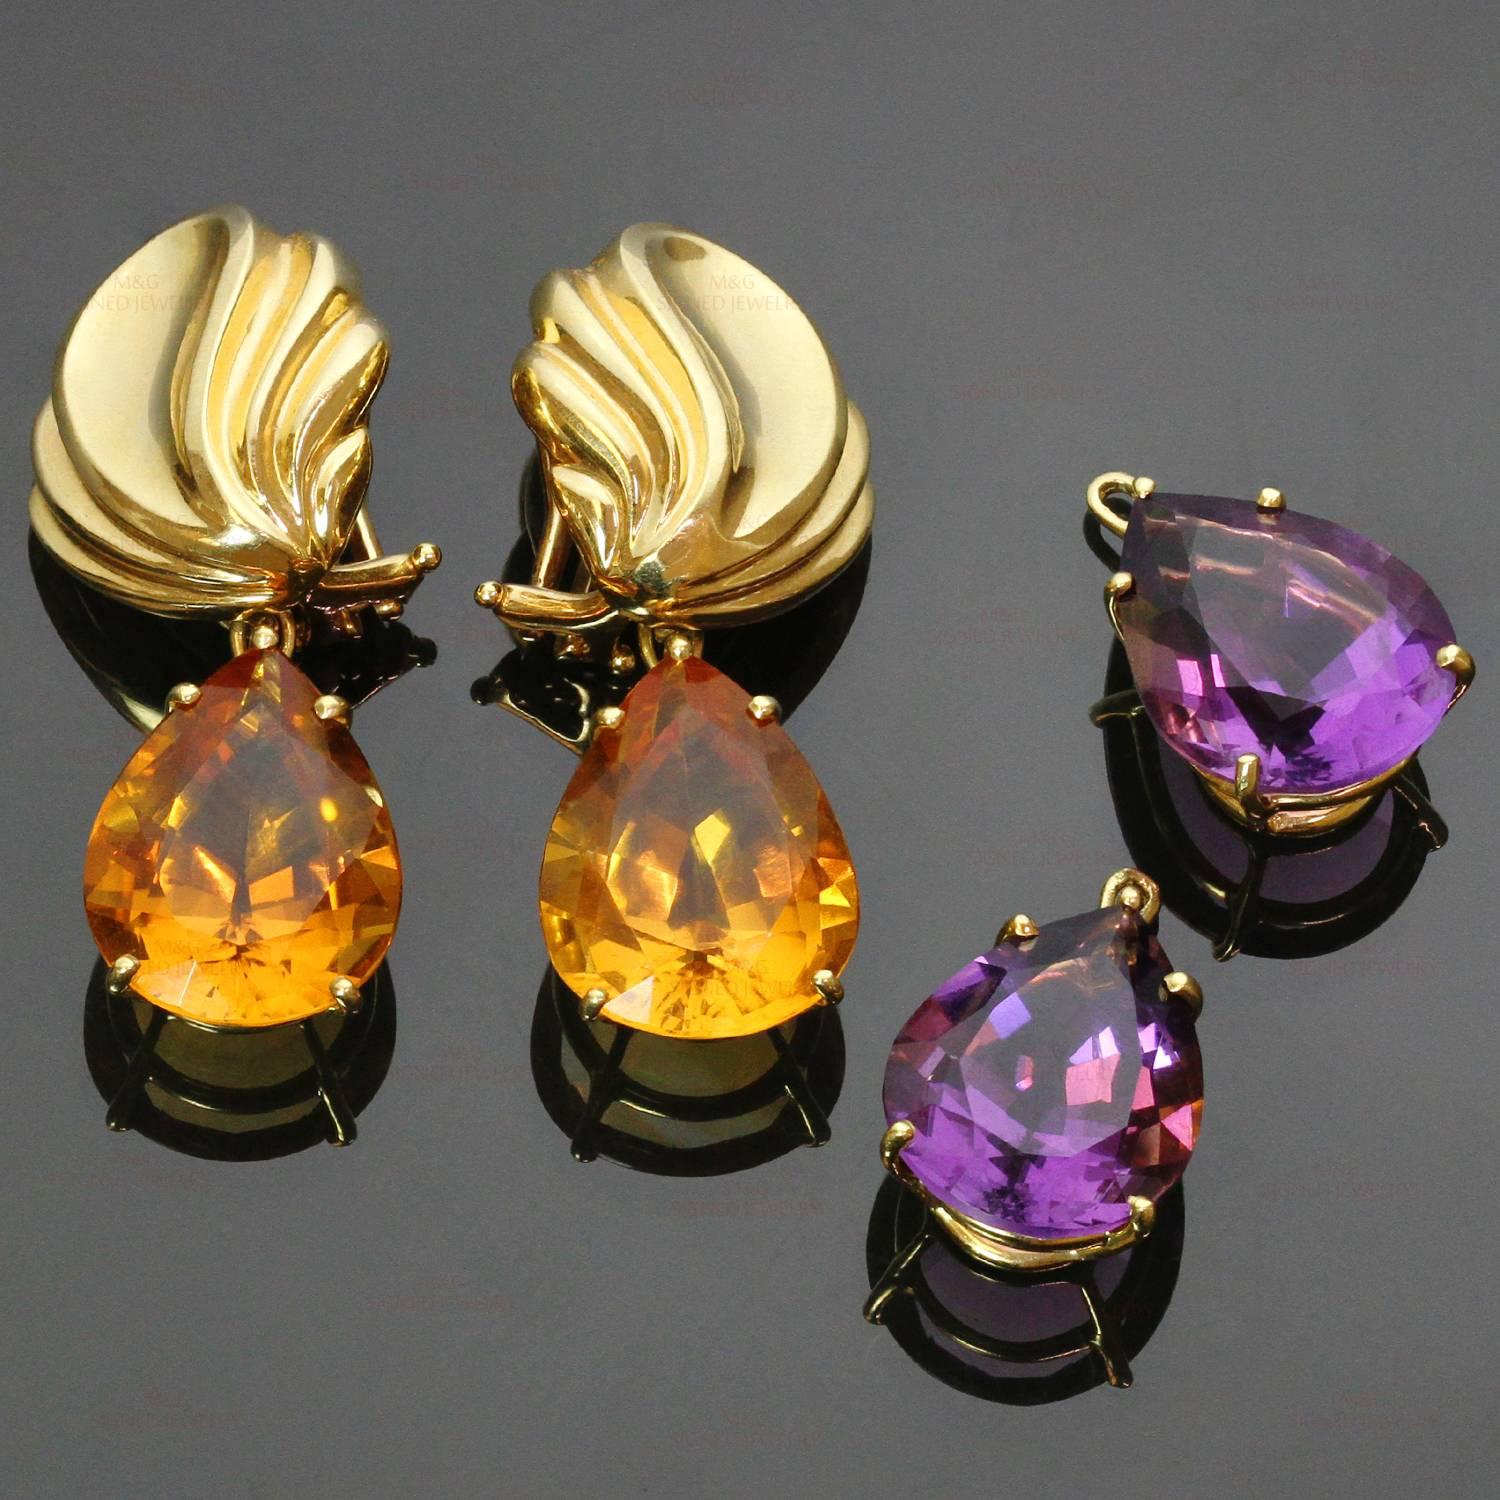 These stunning Tiffany earrings were designed by Paloma Picasso and feature removable gemstone drops for day and night looks. The clip-on earrings are crafted in 18k yellow gold and completed with faceted pear-shaped amethyst and citrine drops. Made